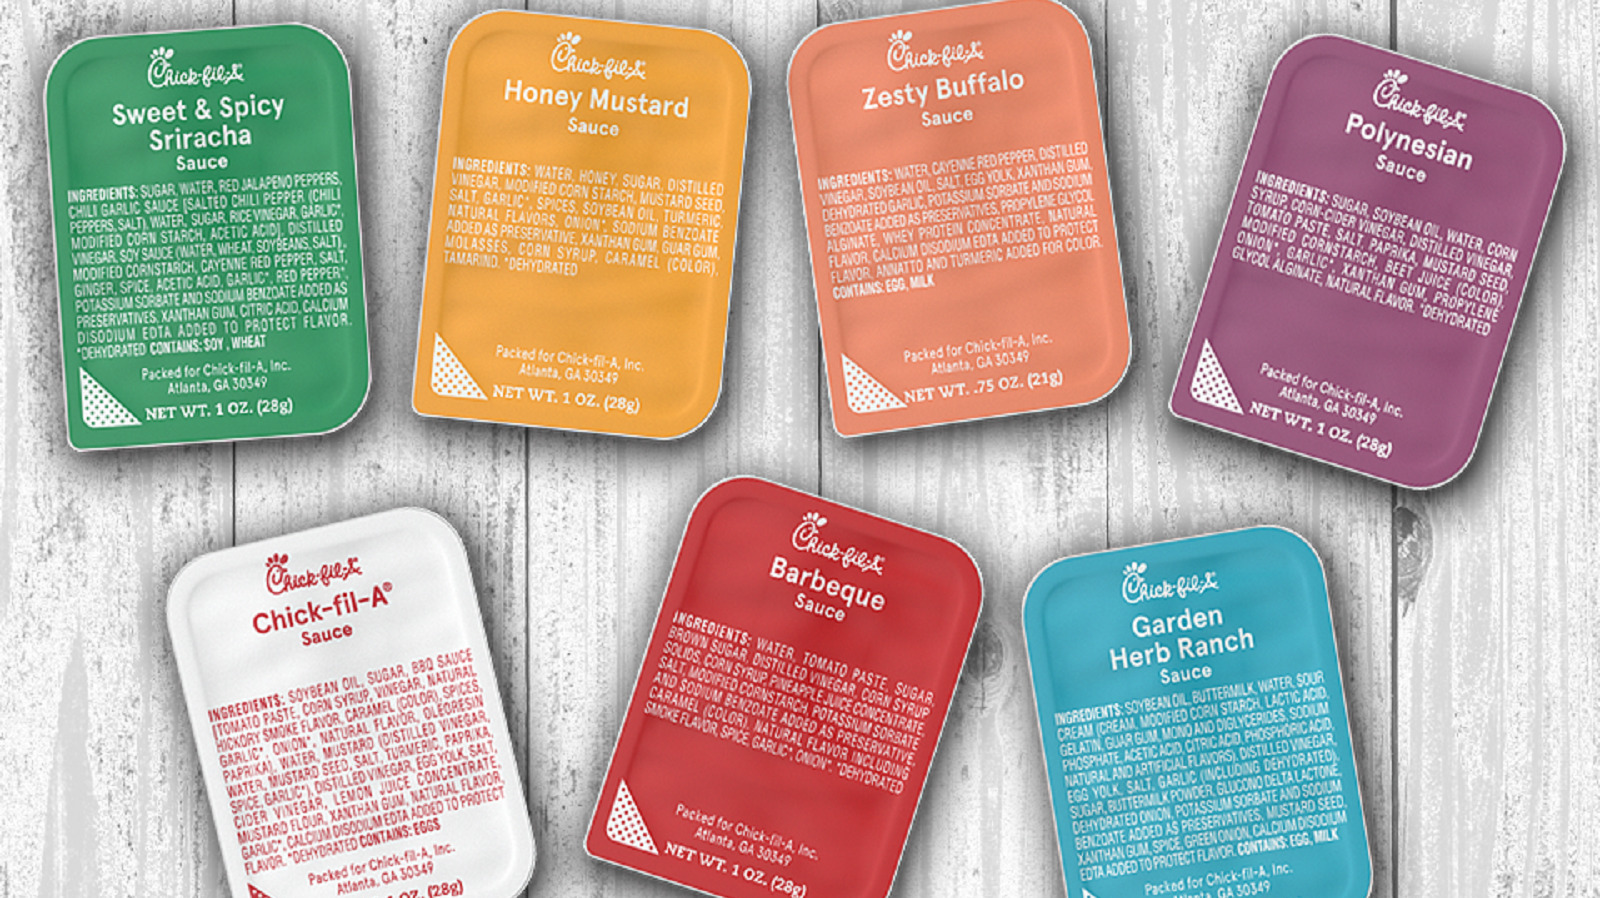 ChickFilA Is Sending Two More Sauces To Grocery Stores (And We Got